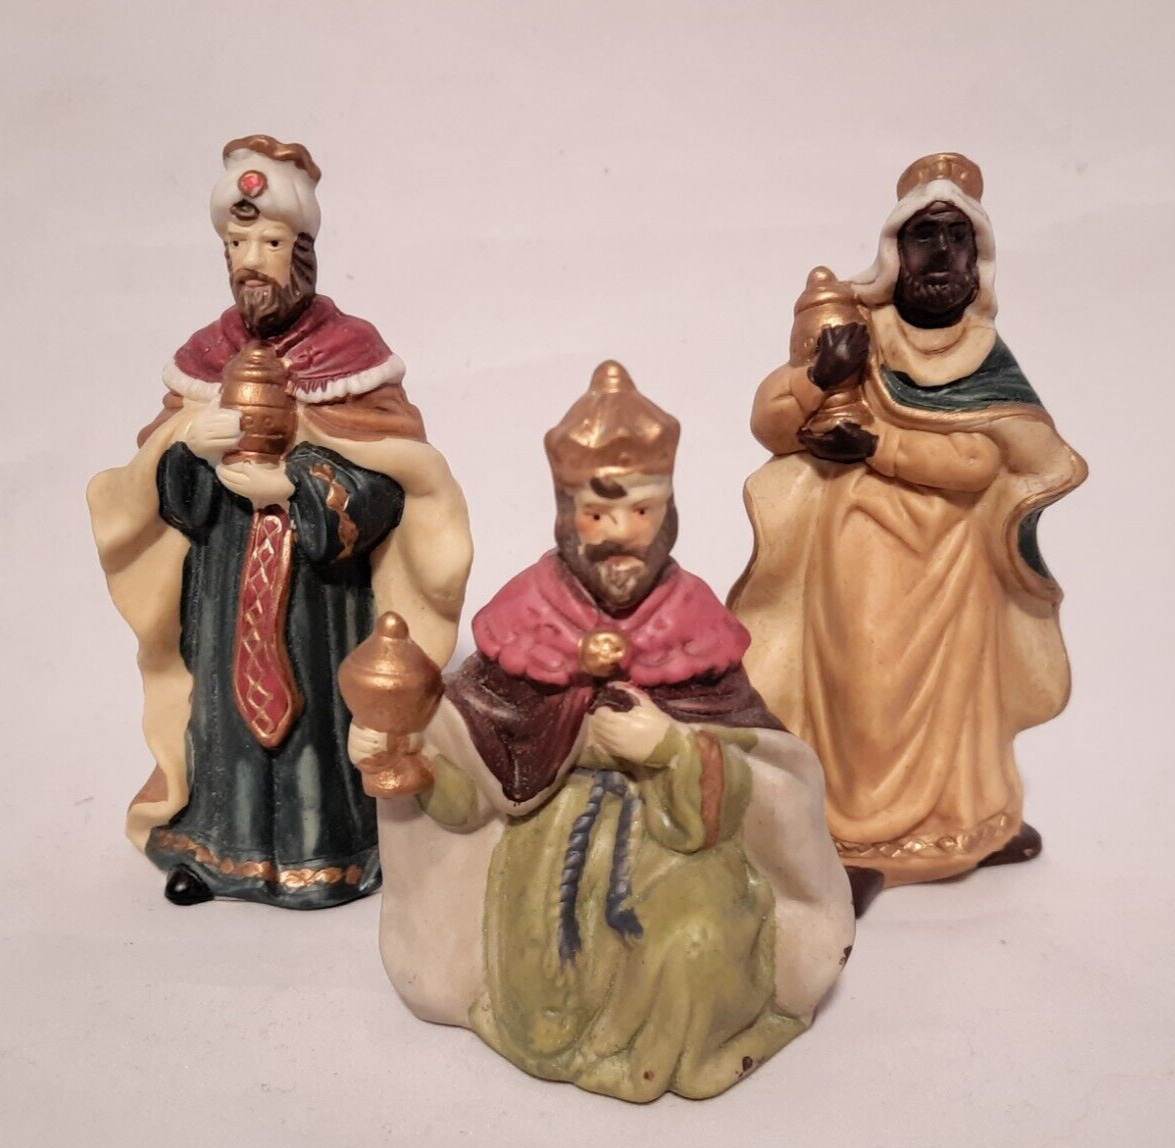 Porcelain 3 Three Wise Men Nativity Figures from Wal-Mart Holiday Time 10 pc set